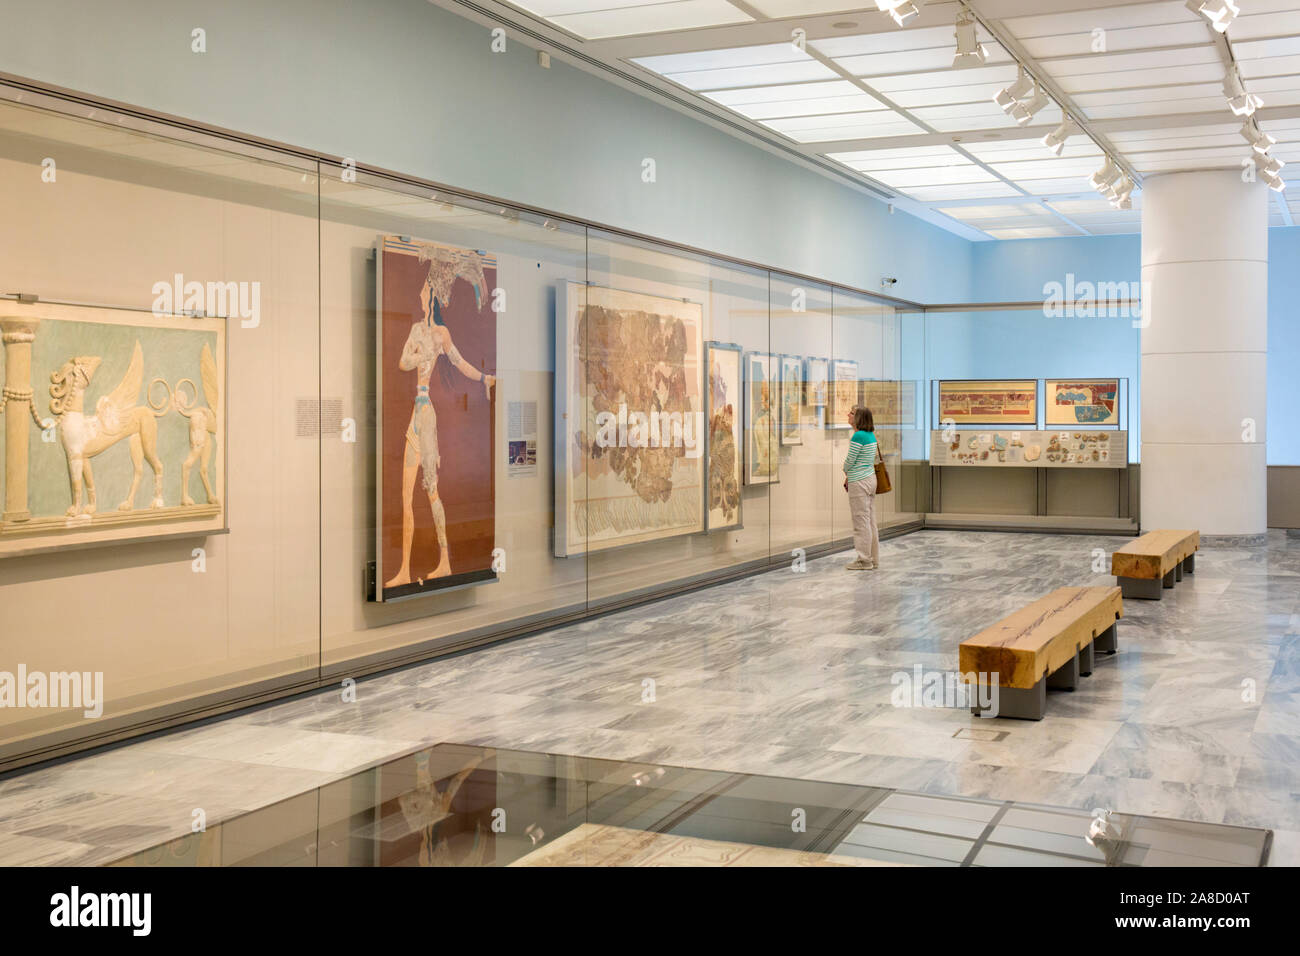 Heraklion, Crete, Greece. Visitor looking at Minoan frescoes on display in the Heraklion Archaeological Museum. Stock Photo